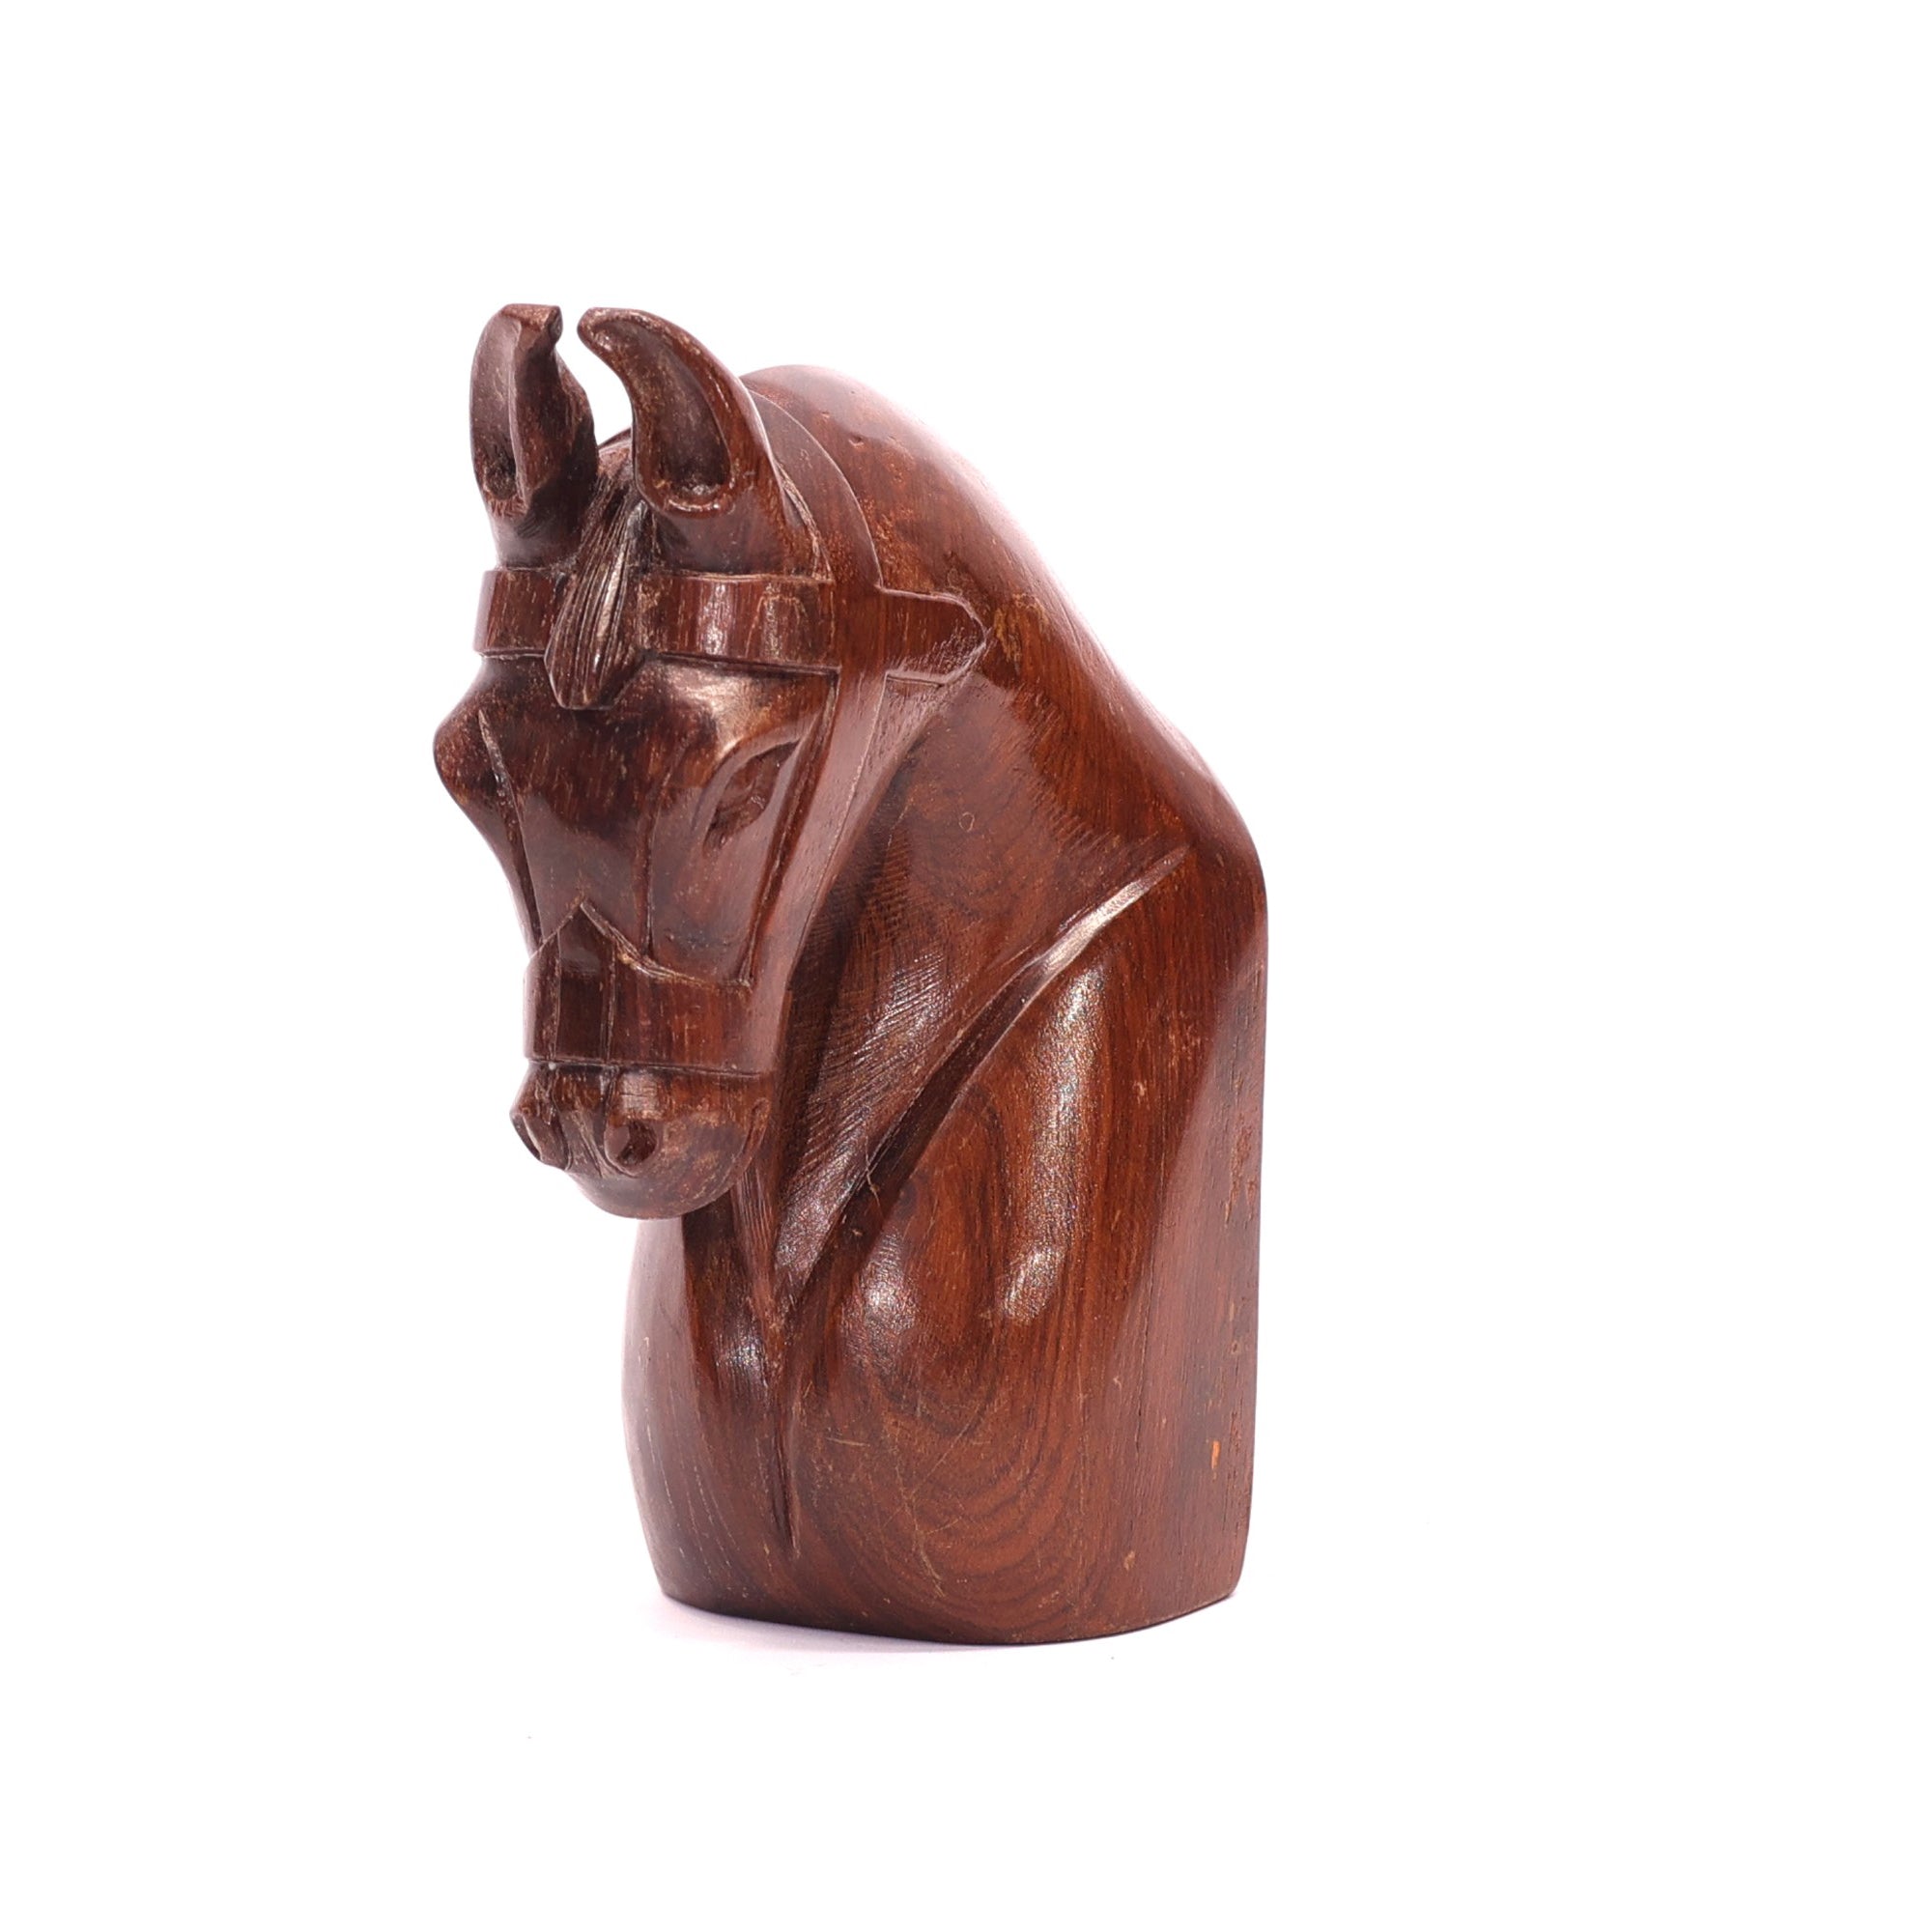 Wooden Horse Carving Animal Figurine